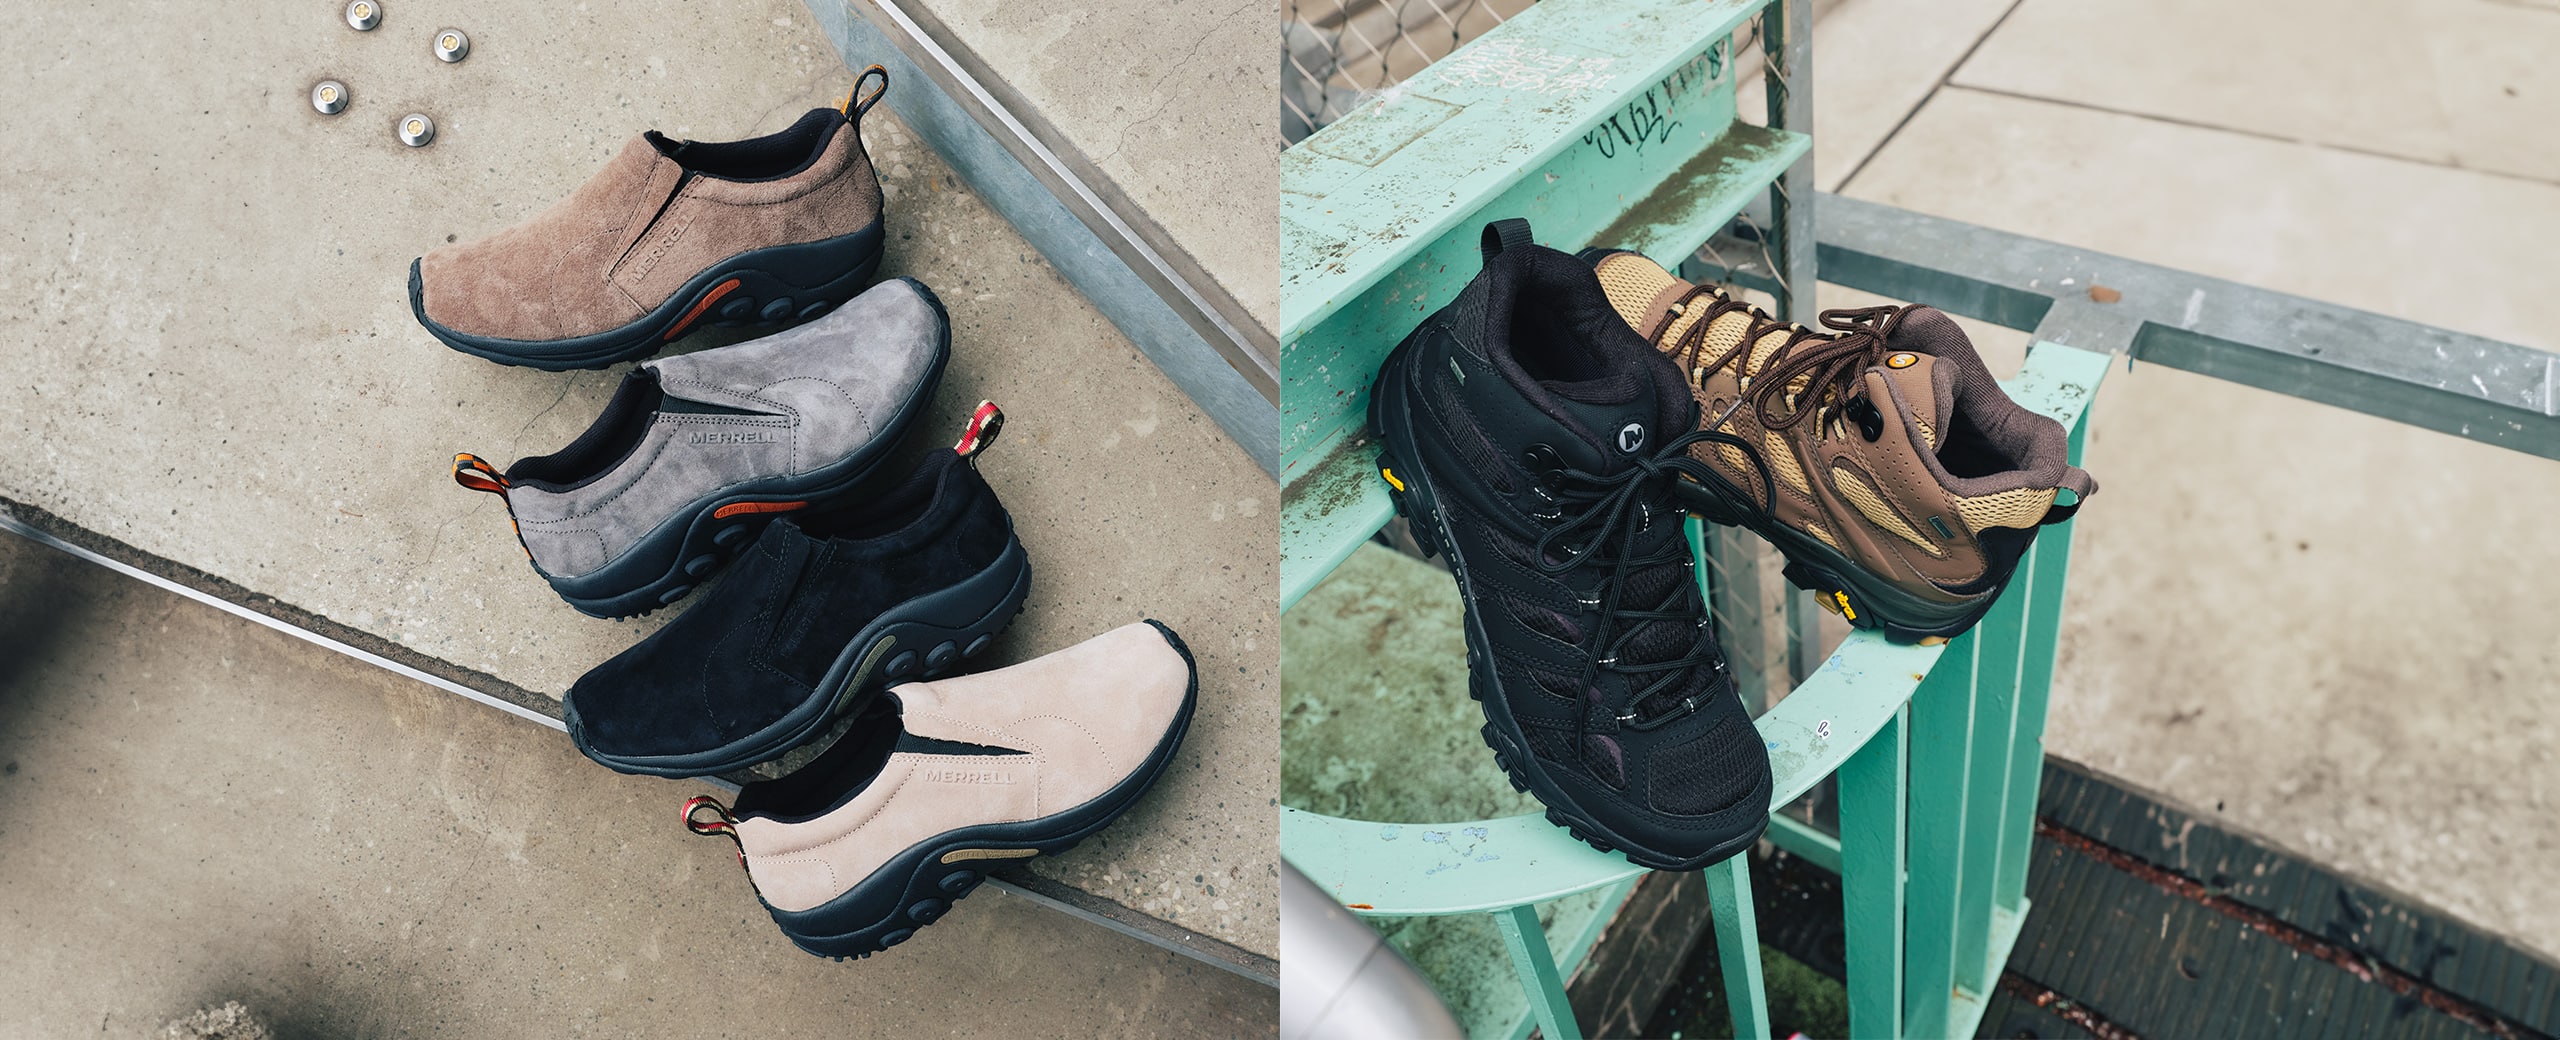 "MERRELL 2024 SPRING COLLECTION | LET’S GET OUT SIDE / もっと自然を楽しもう"